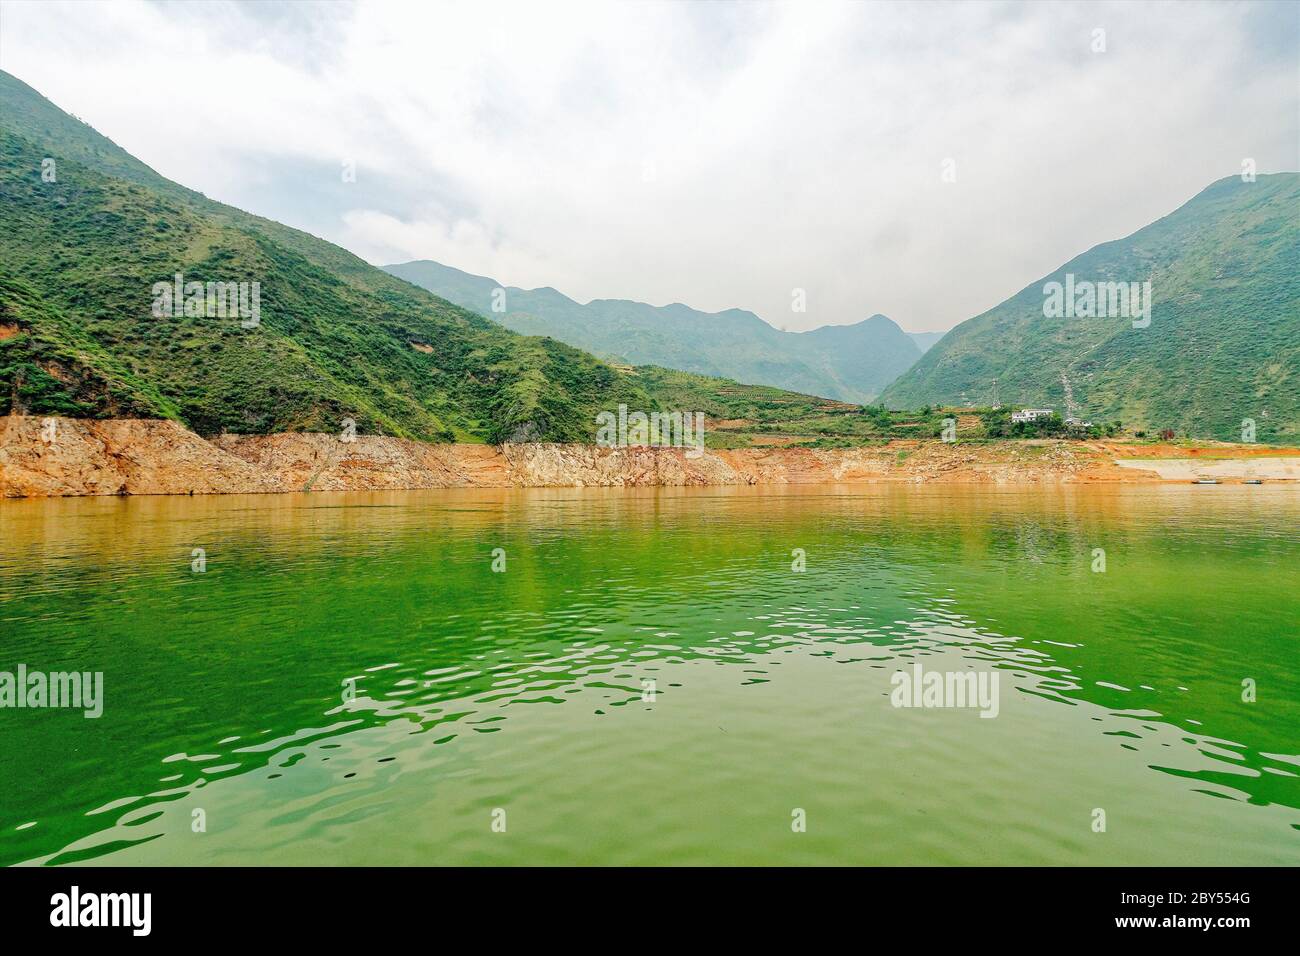 A small village sits in a small bay in the Three Lesser Gorges on the Yangtze River Stock Photo